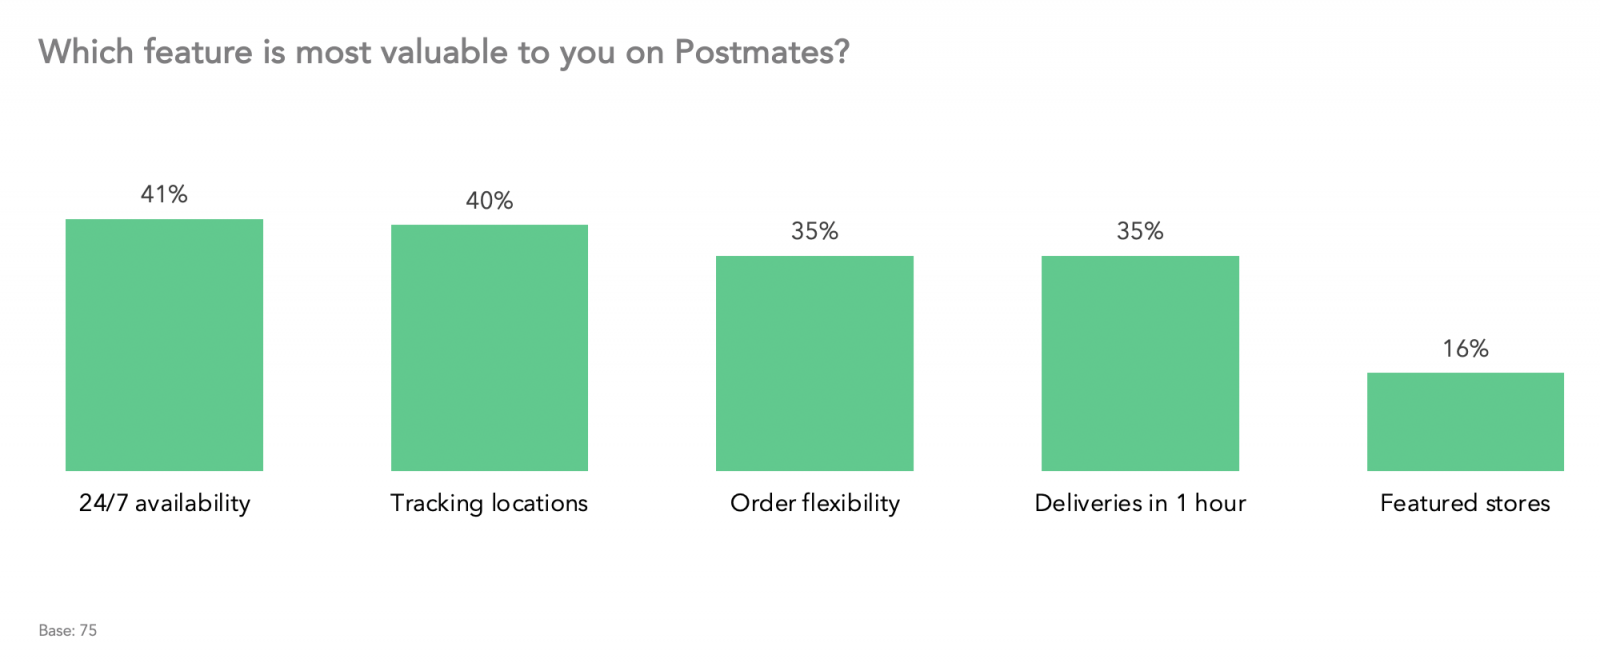 Which feature is most valuable to you on Postmates?